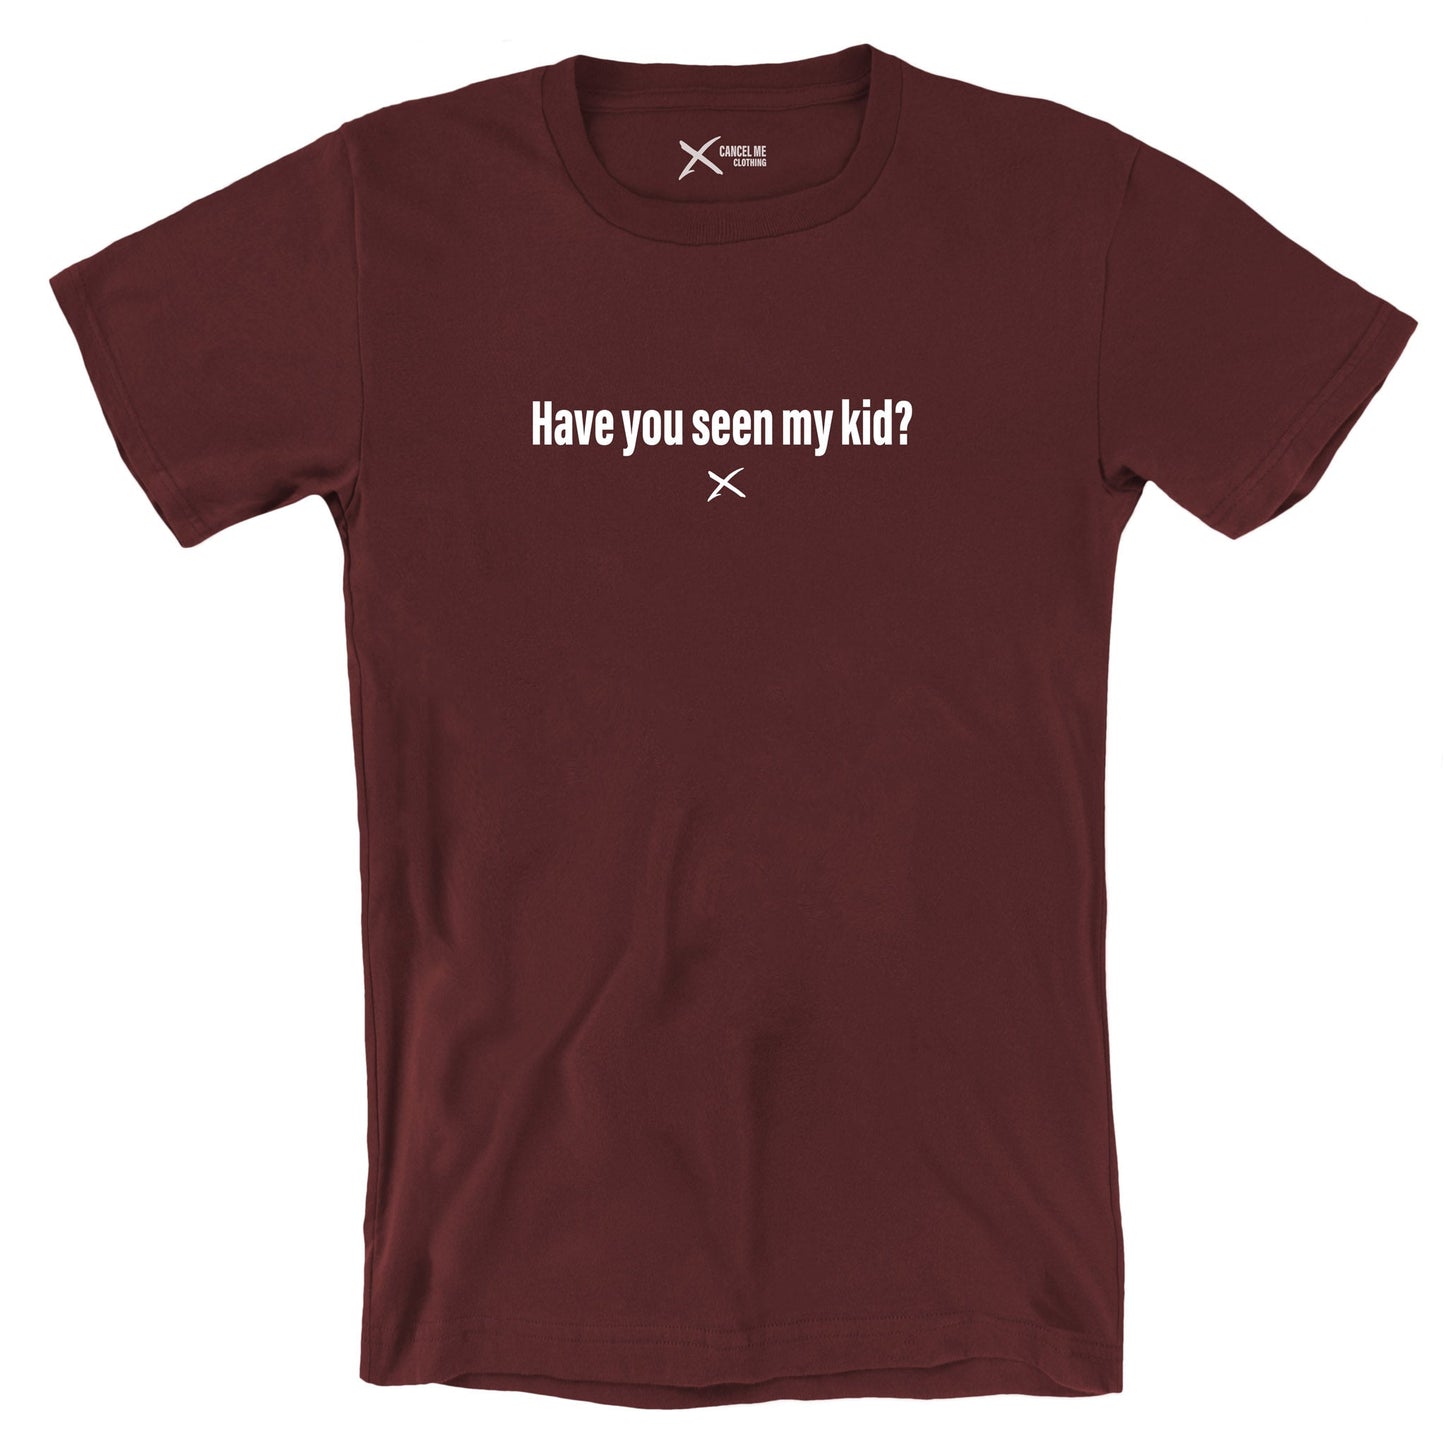 Have you seen my kid? - Shirt